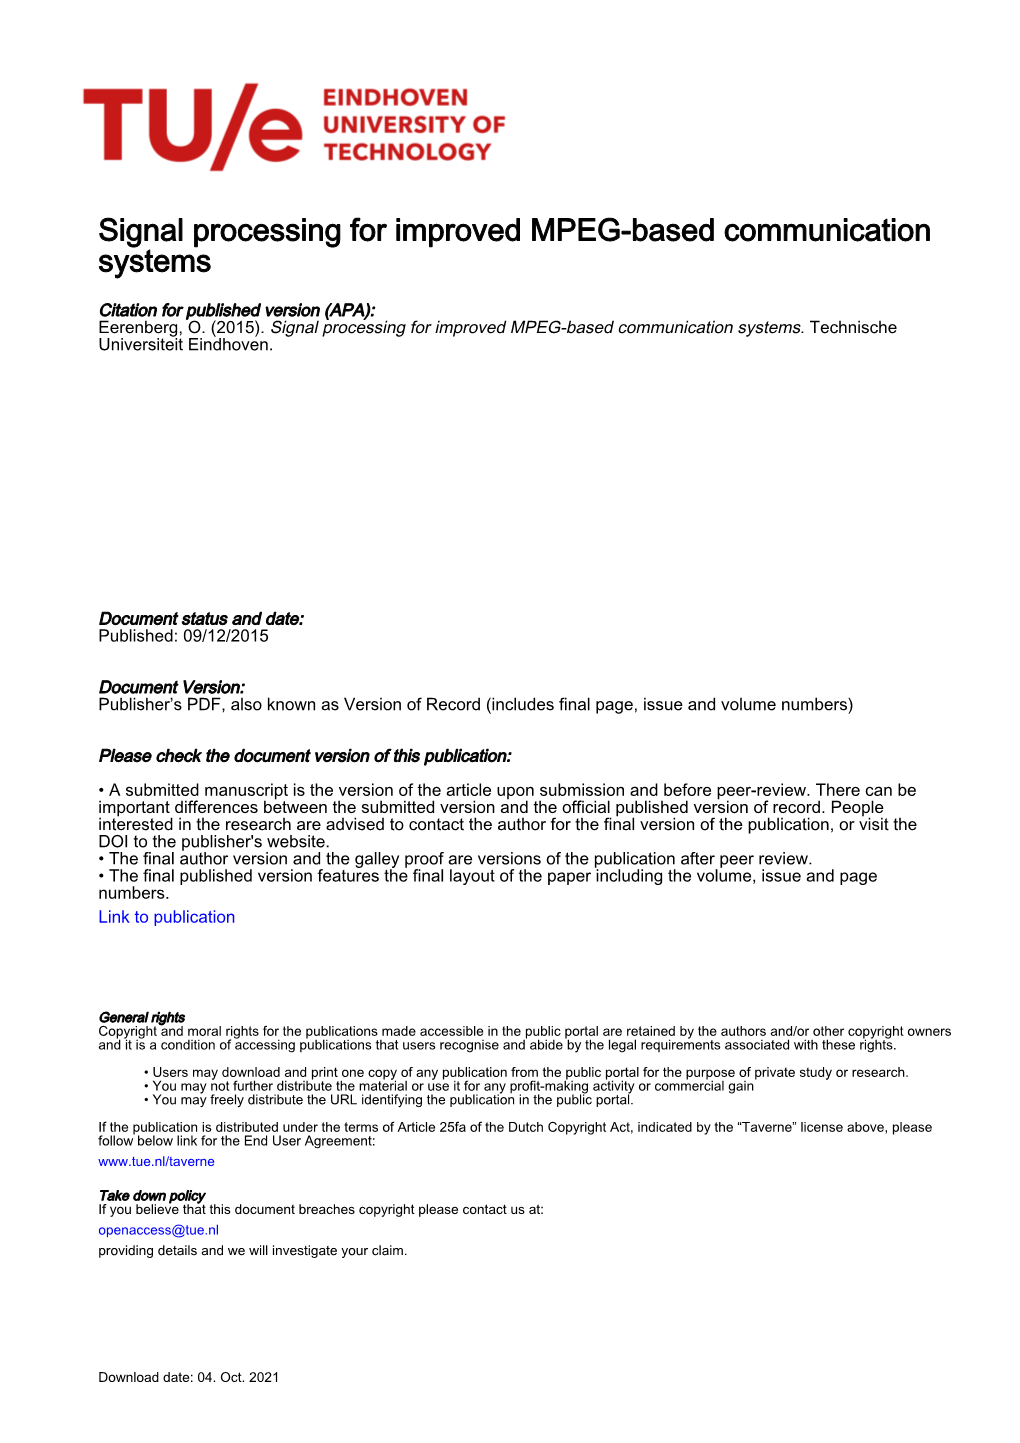 Signal Processing for Improved MPEG-Based Communication Systems